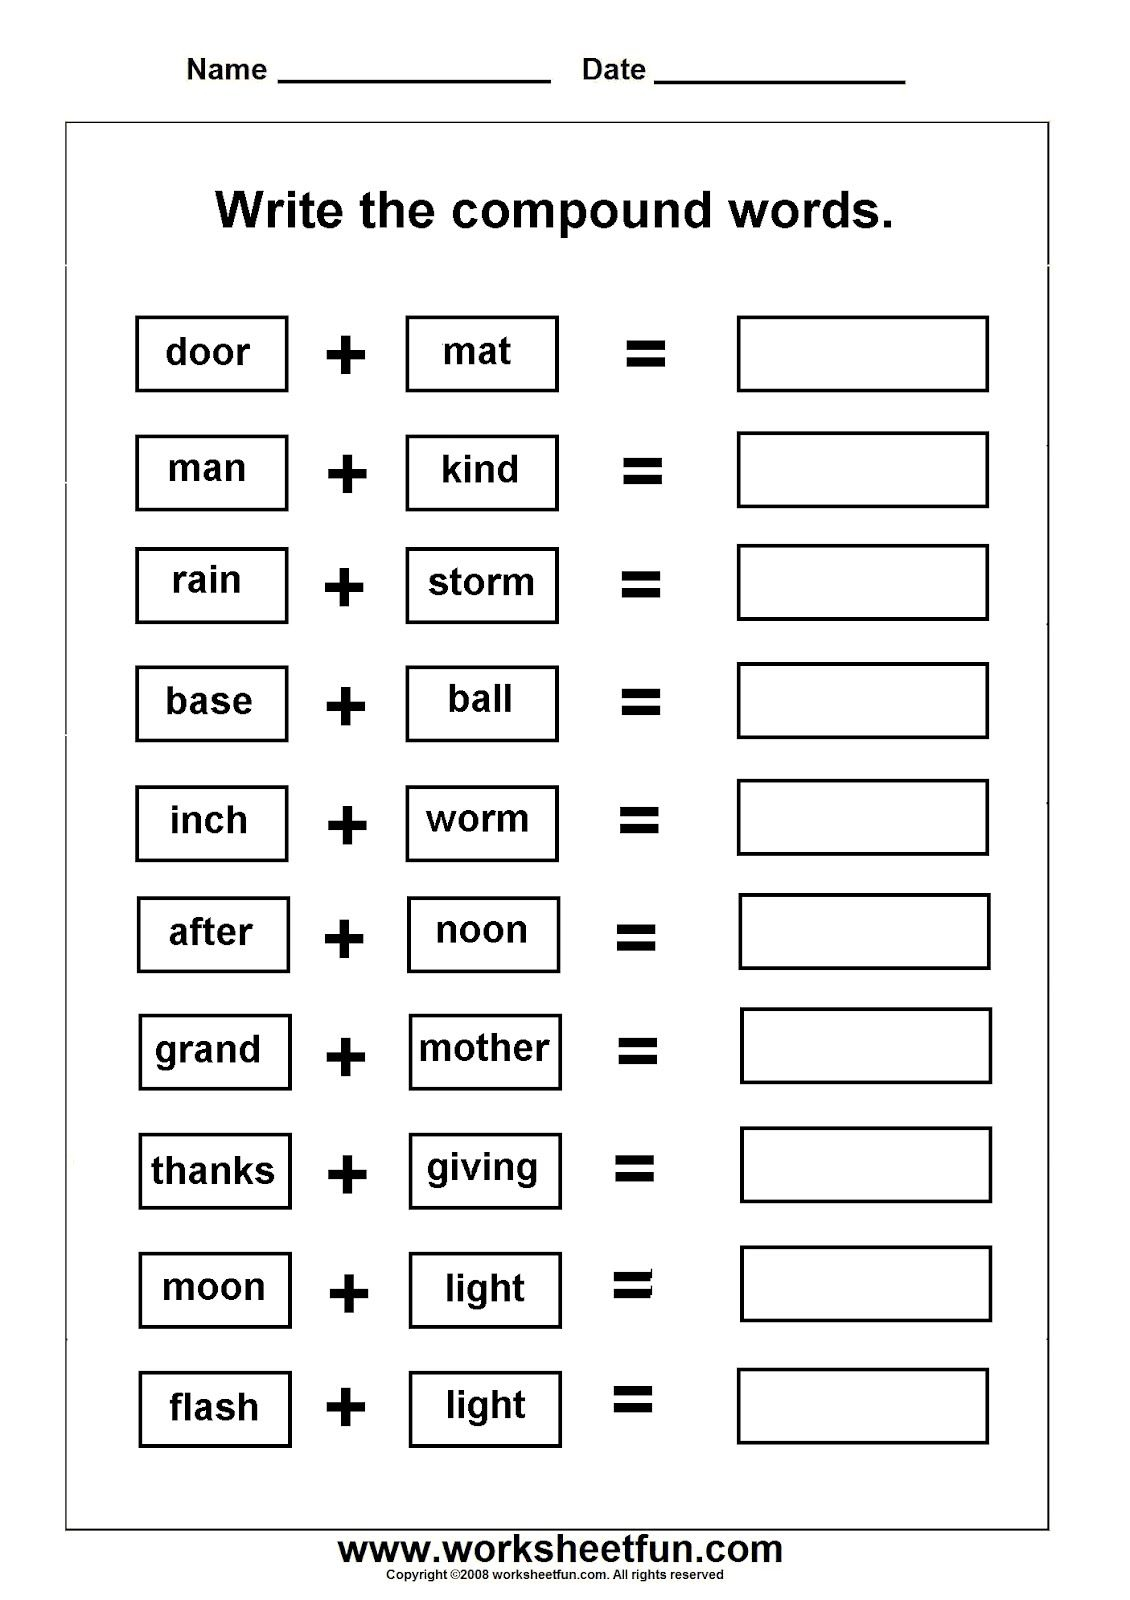 Free Printable Compound Word Worksheets Lexia s Blog